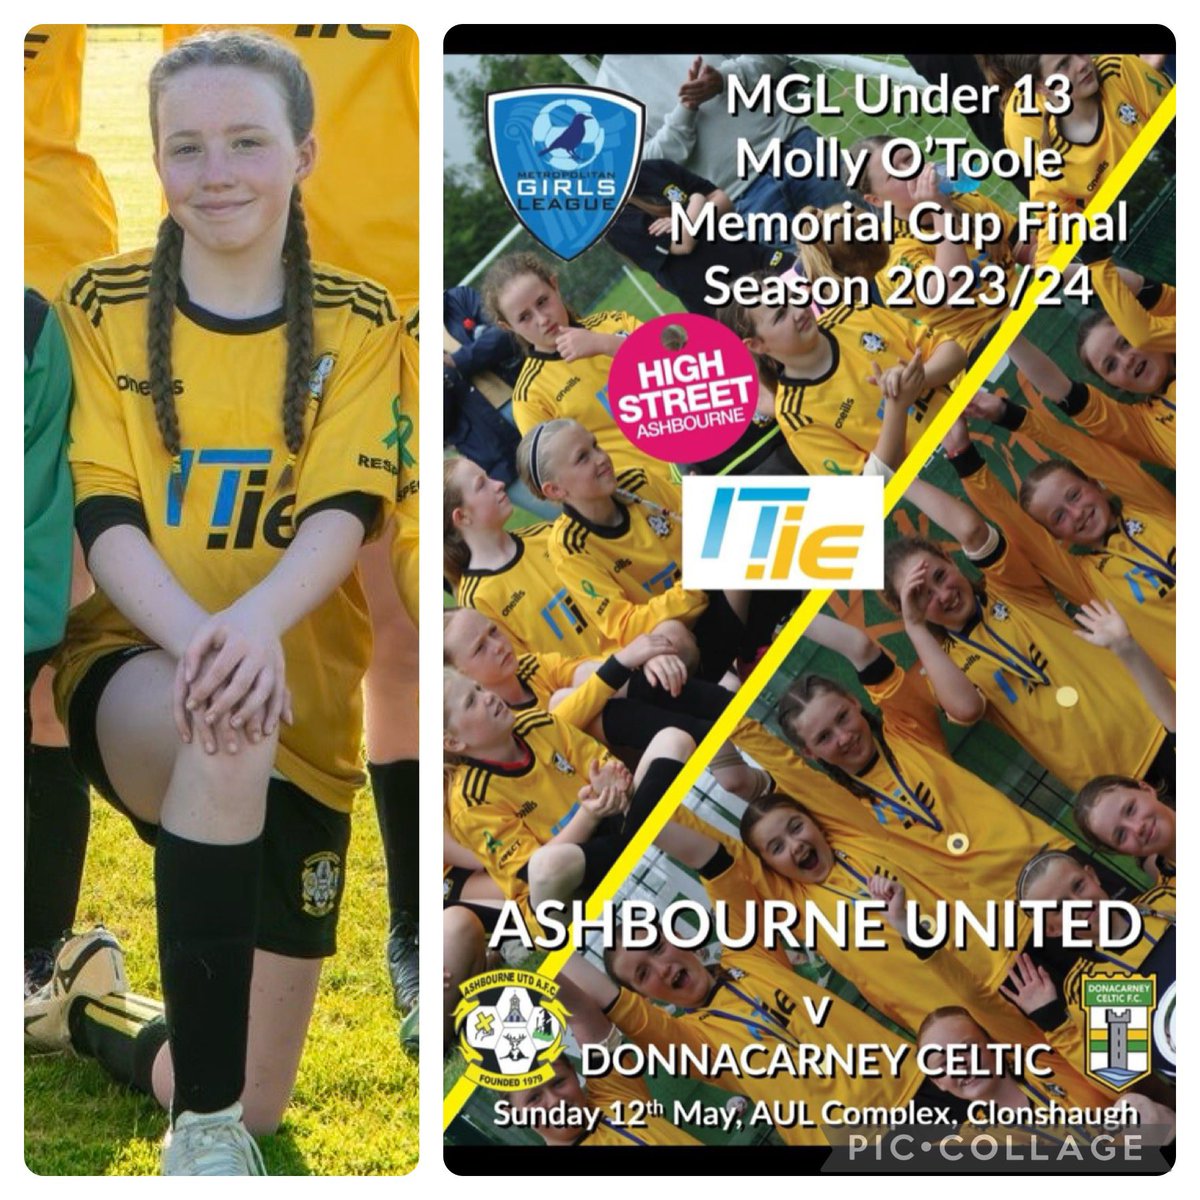 Last but by no means least❤️ best of luck to Daisy who is the baby of the house playing in her cup final today with @AshbourneUnited #ProudDad #Family #busyweekend